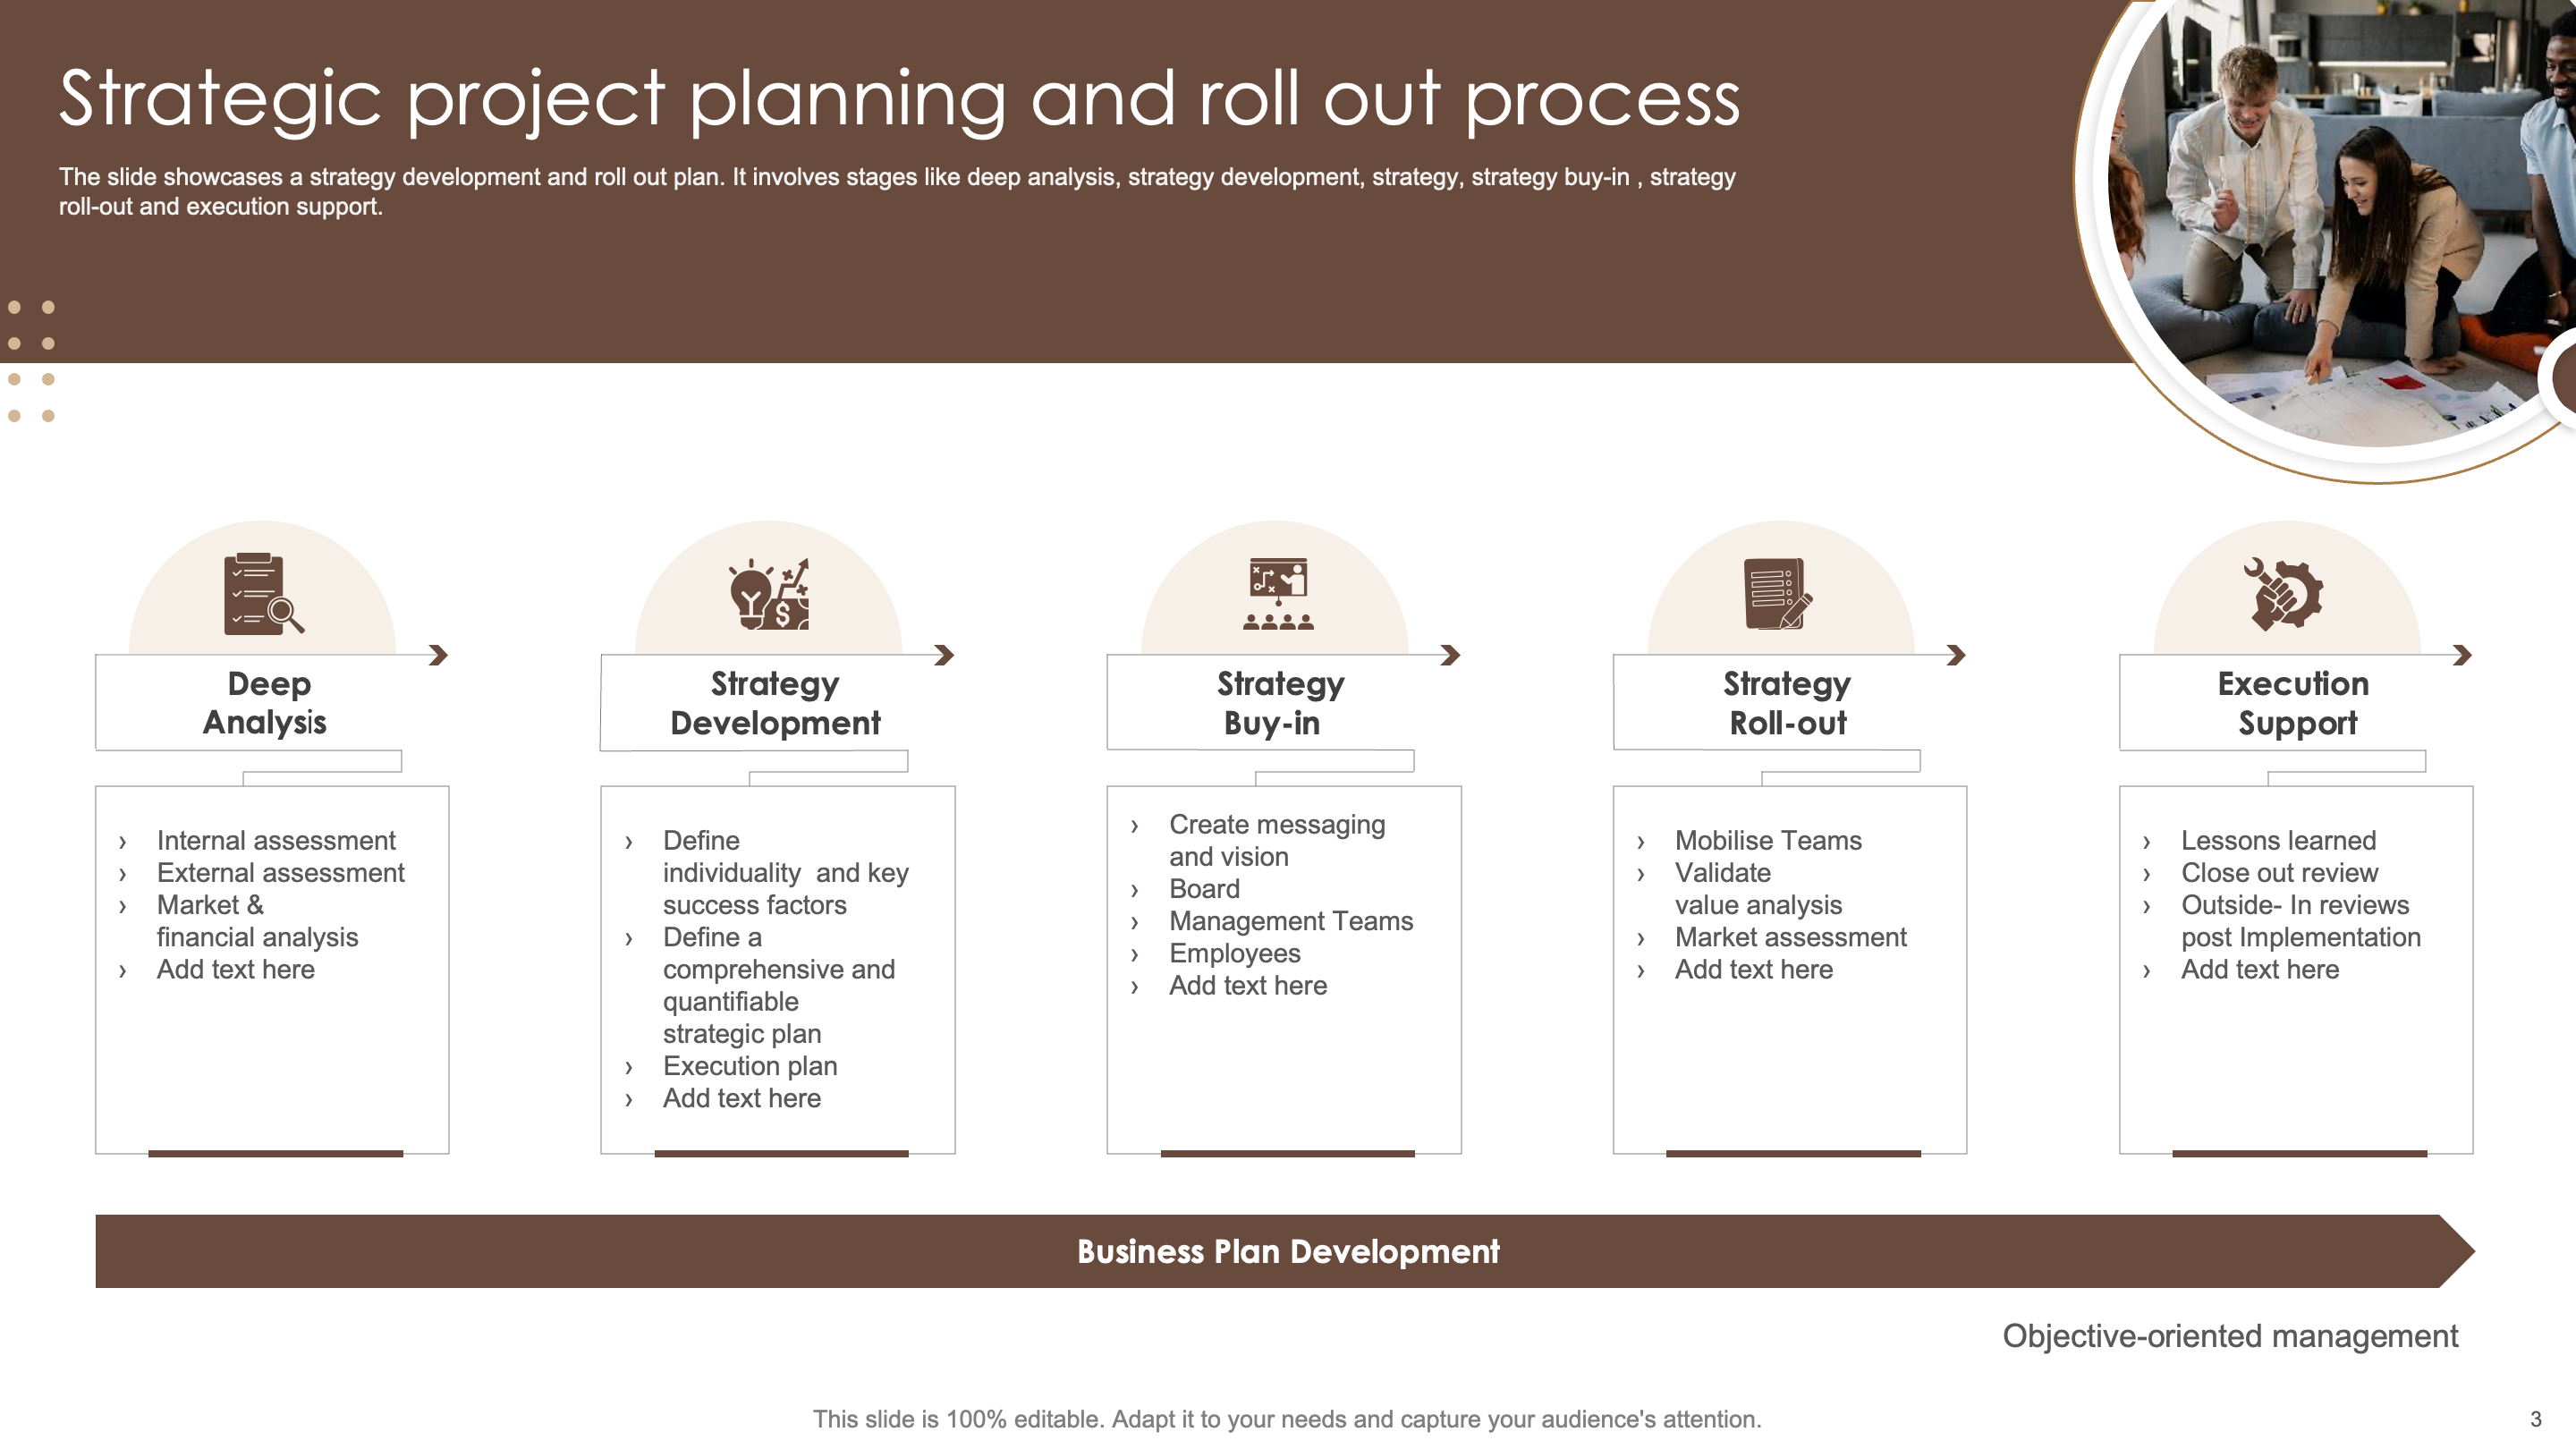 Strategic project planning and roll out process